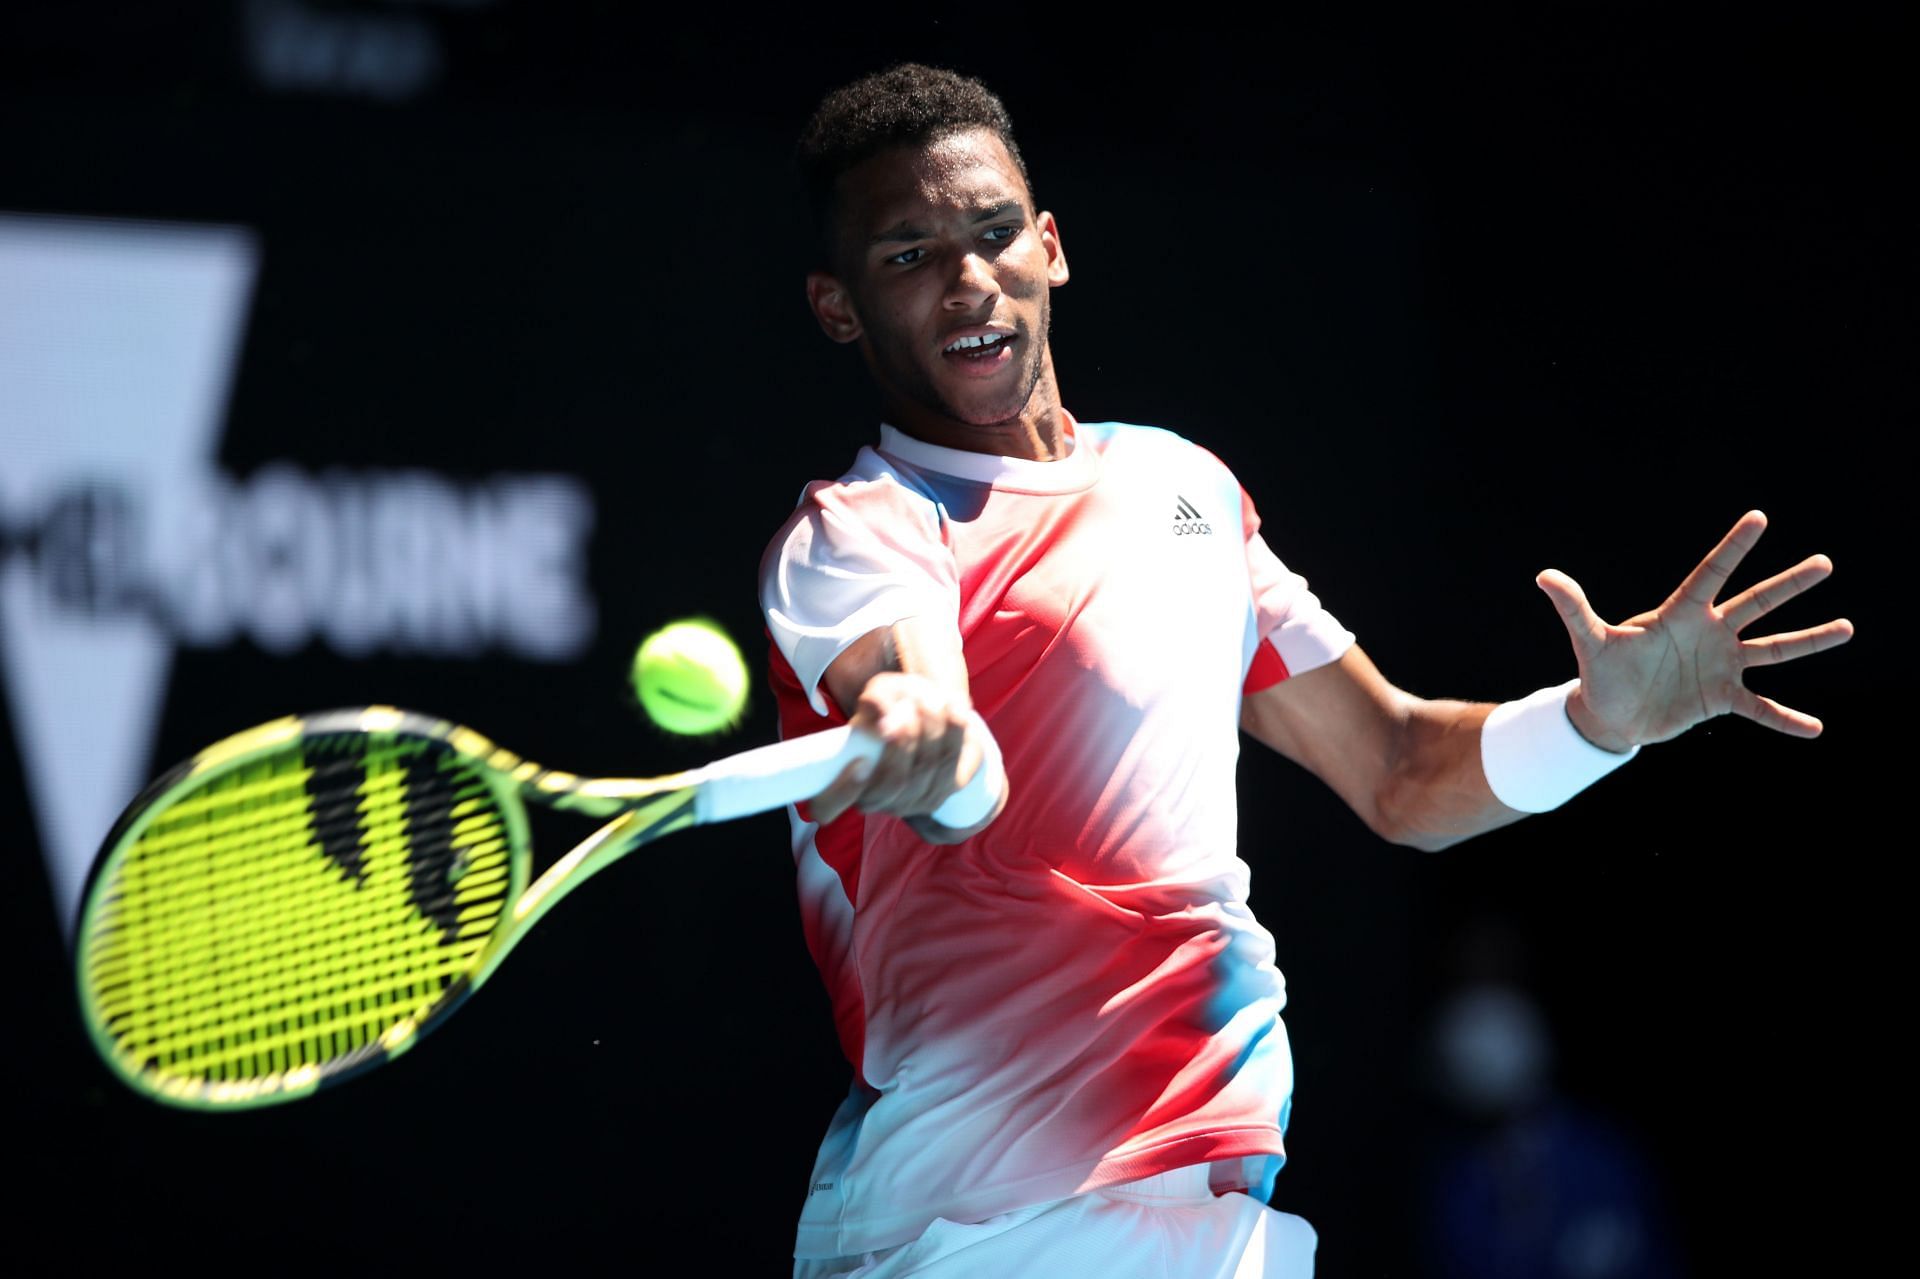 Felix Auger-Aliassime has been in fine form this year so far and will look to defeat Cameron Norrie.